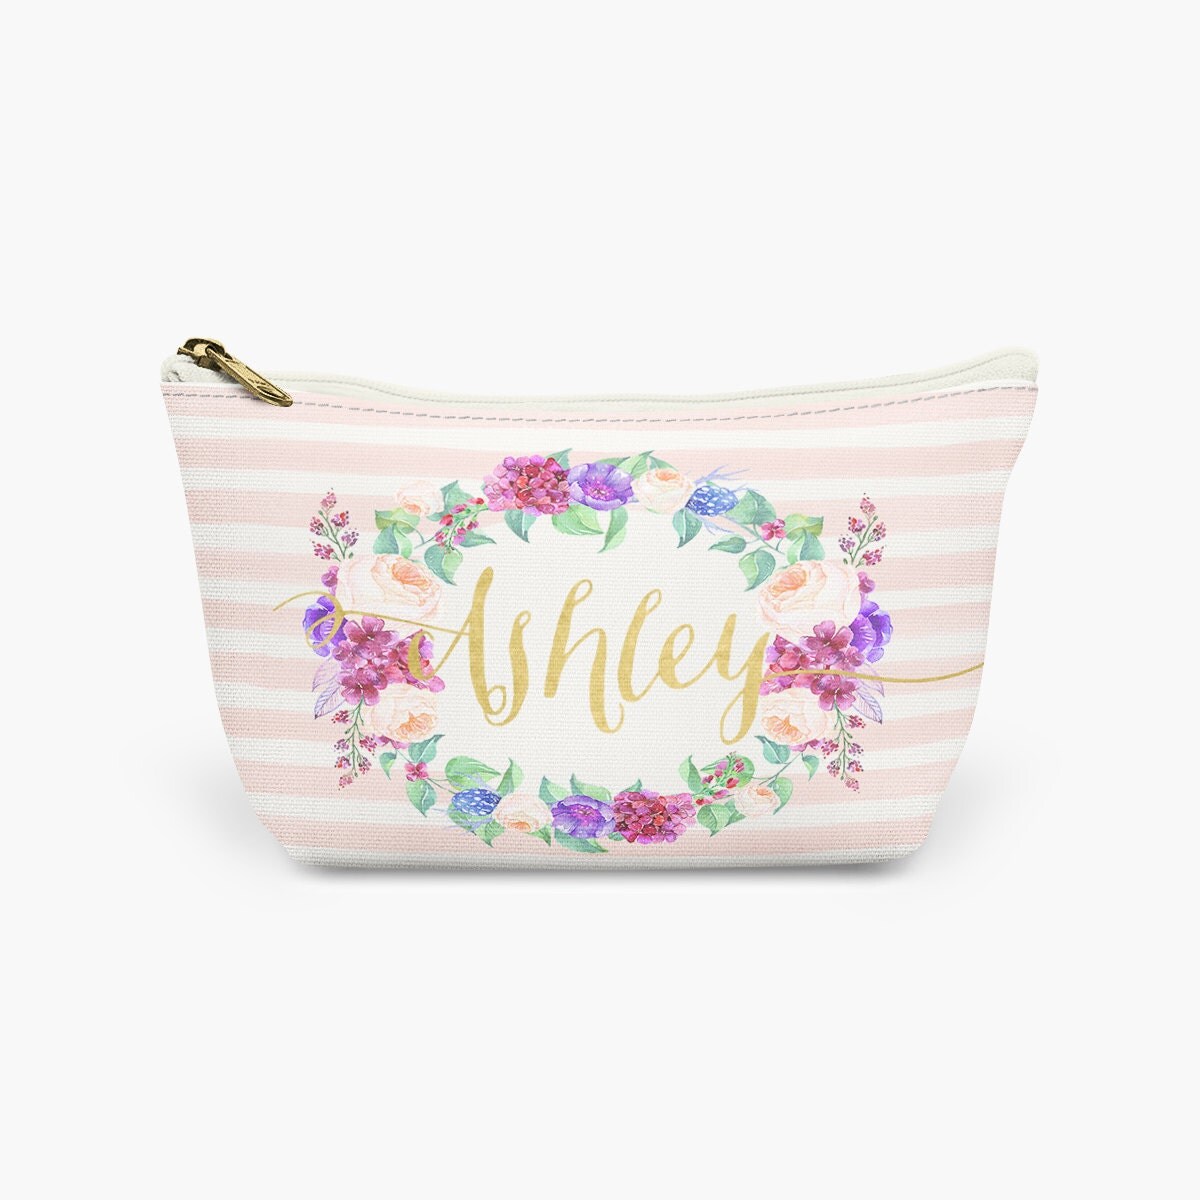 Personalized bridesmaid gifts custom zipper pouches wedding bridal shower party wedding favors thank you cosmetic bag coin purse makeup case